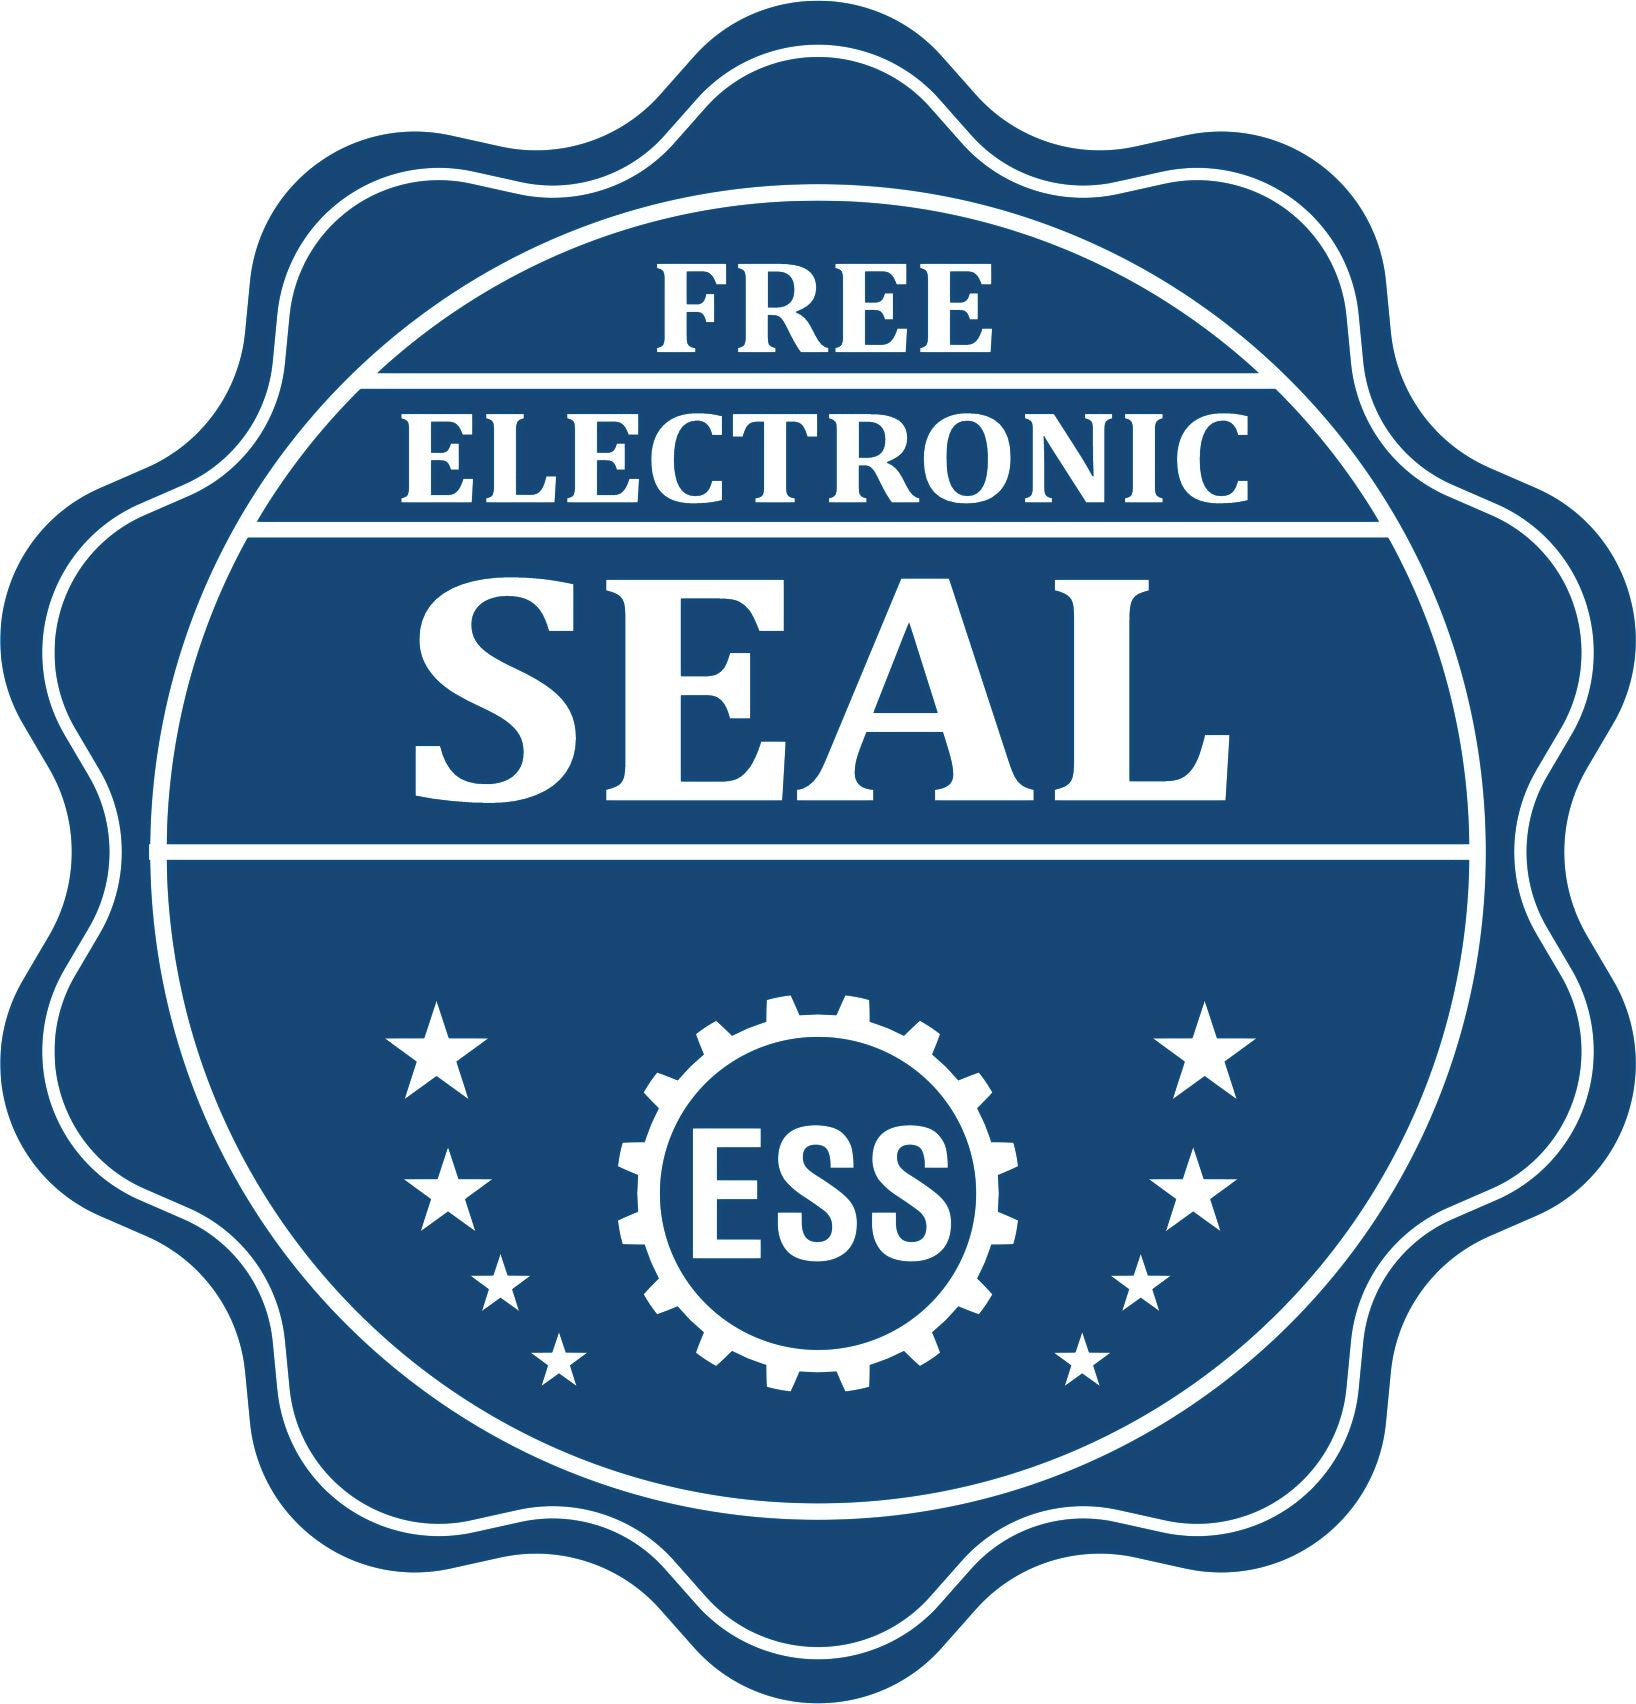 A badge showing a free electronic seal for the Hybrid Nevada Landscape Architect Seal with stars and the ESS gear on the emblem.